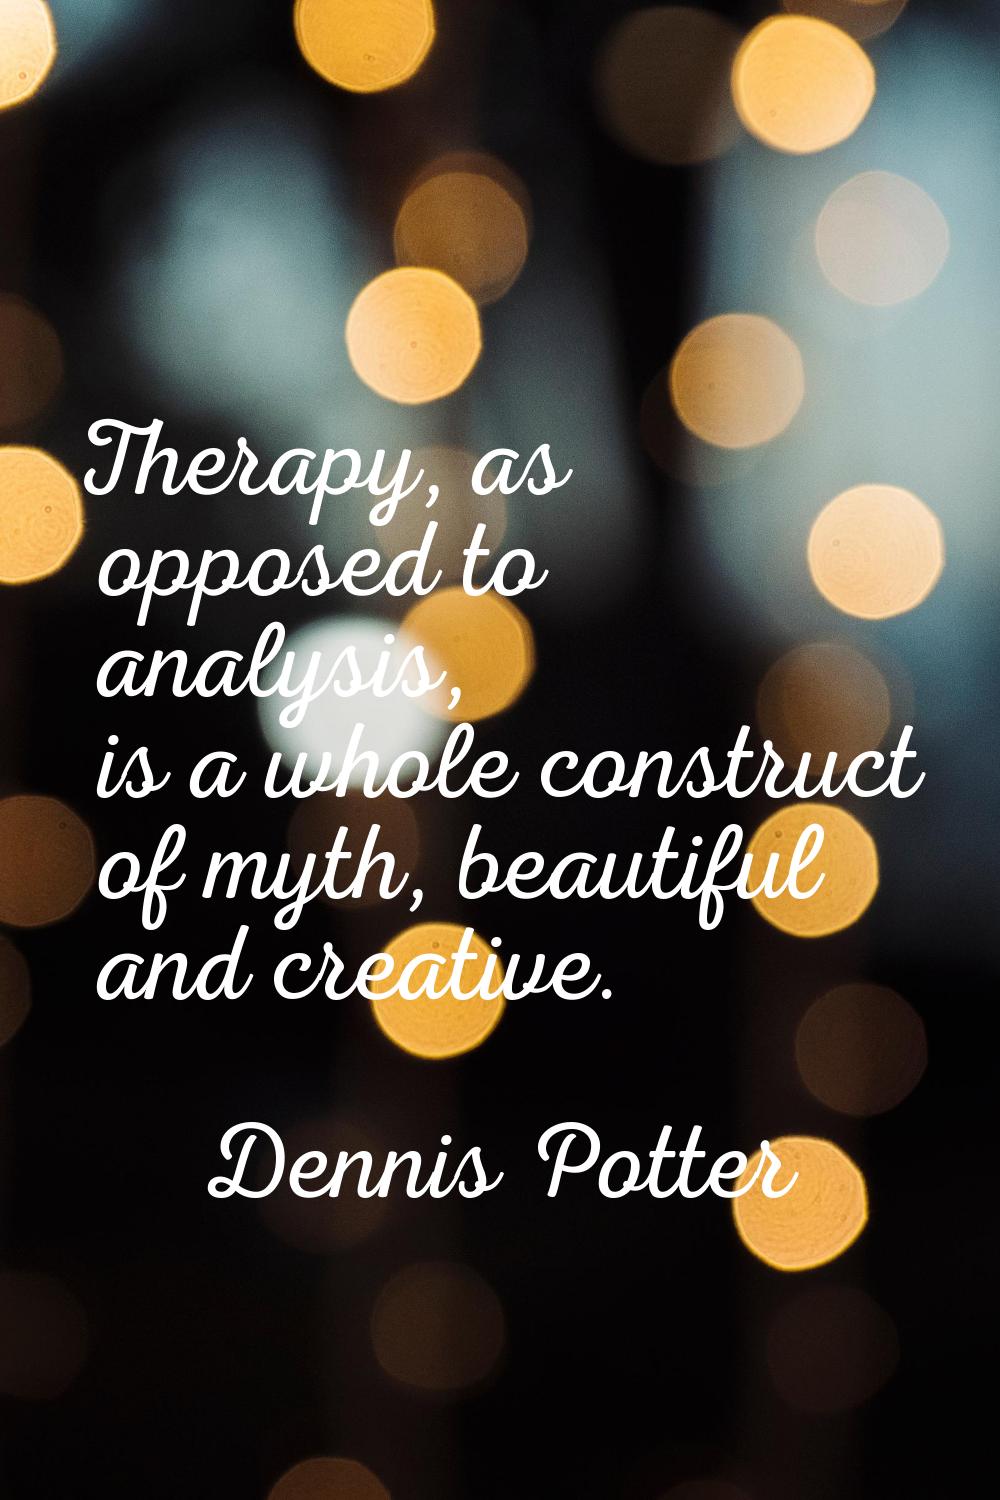 Therapy, as opposed to analysis, is a whole construct of myth, beautiful and creative.